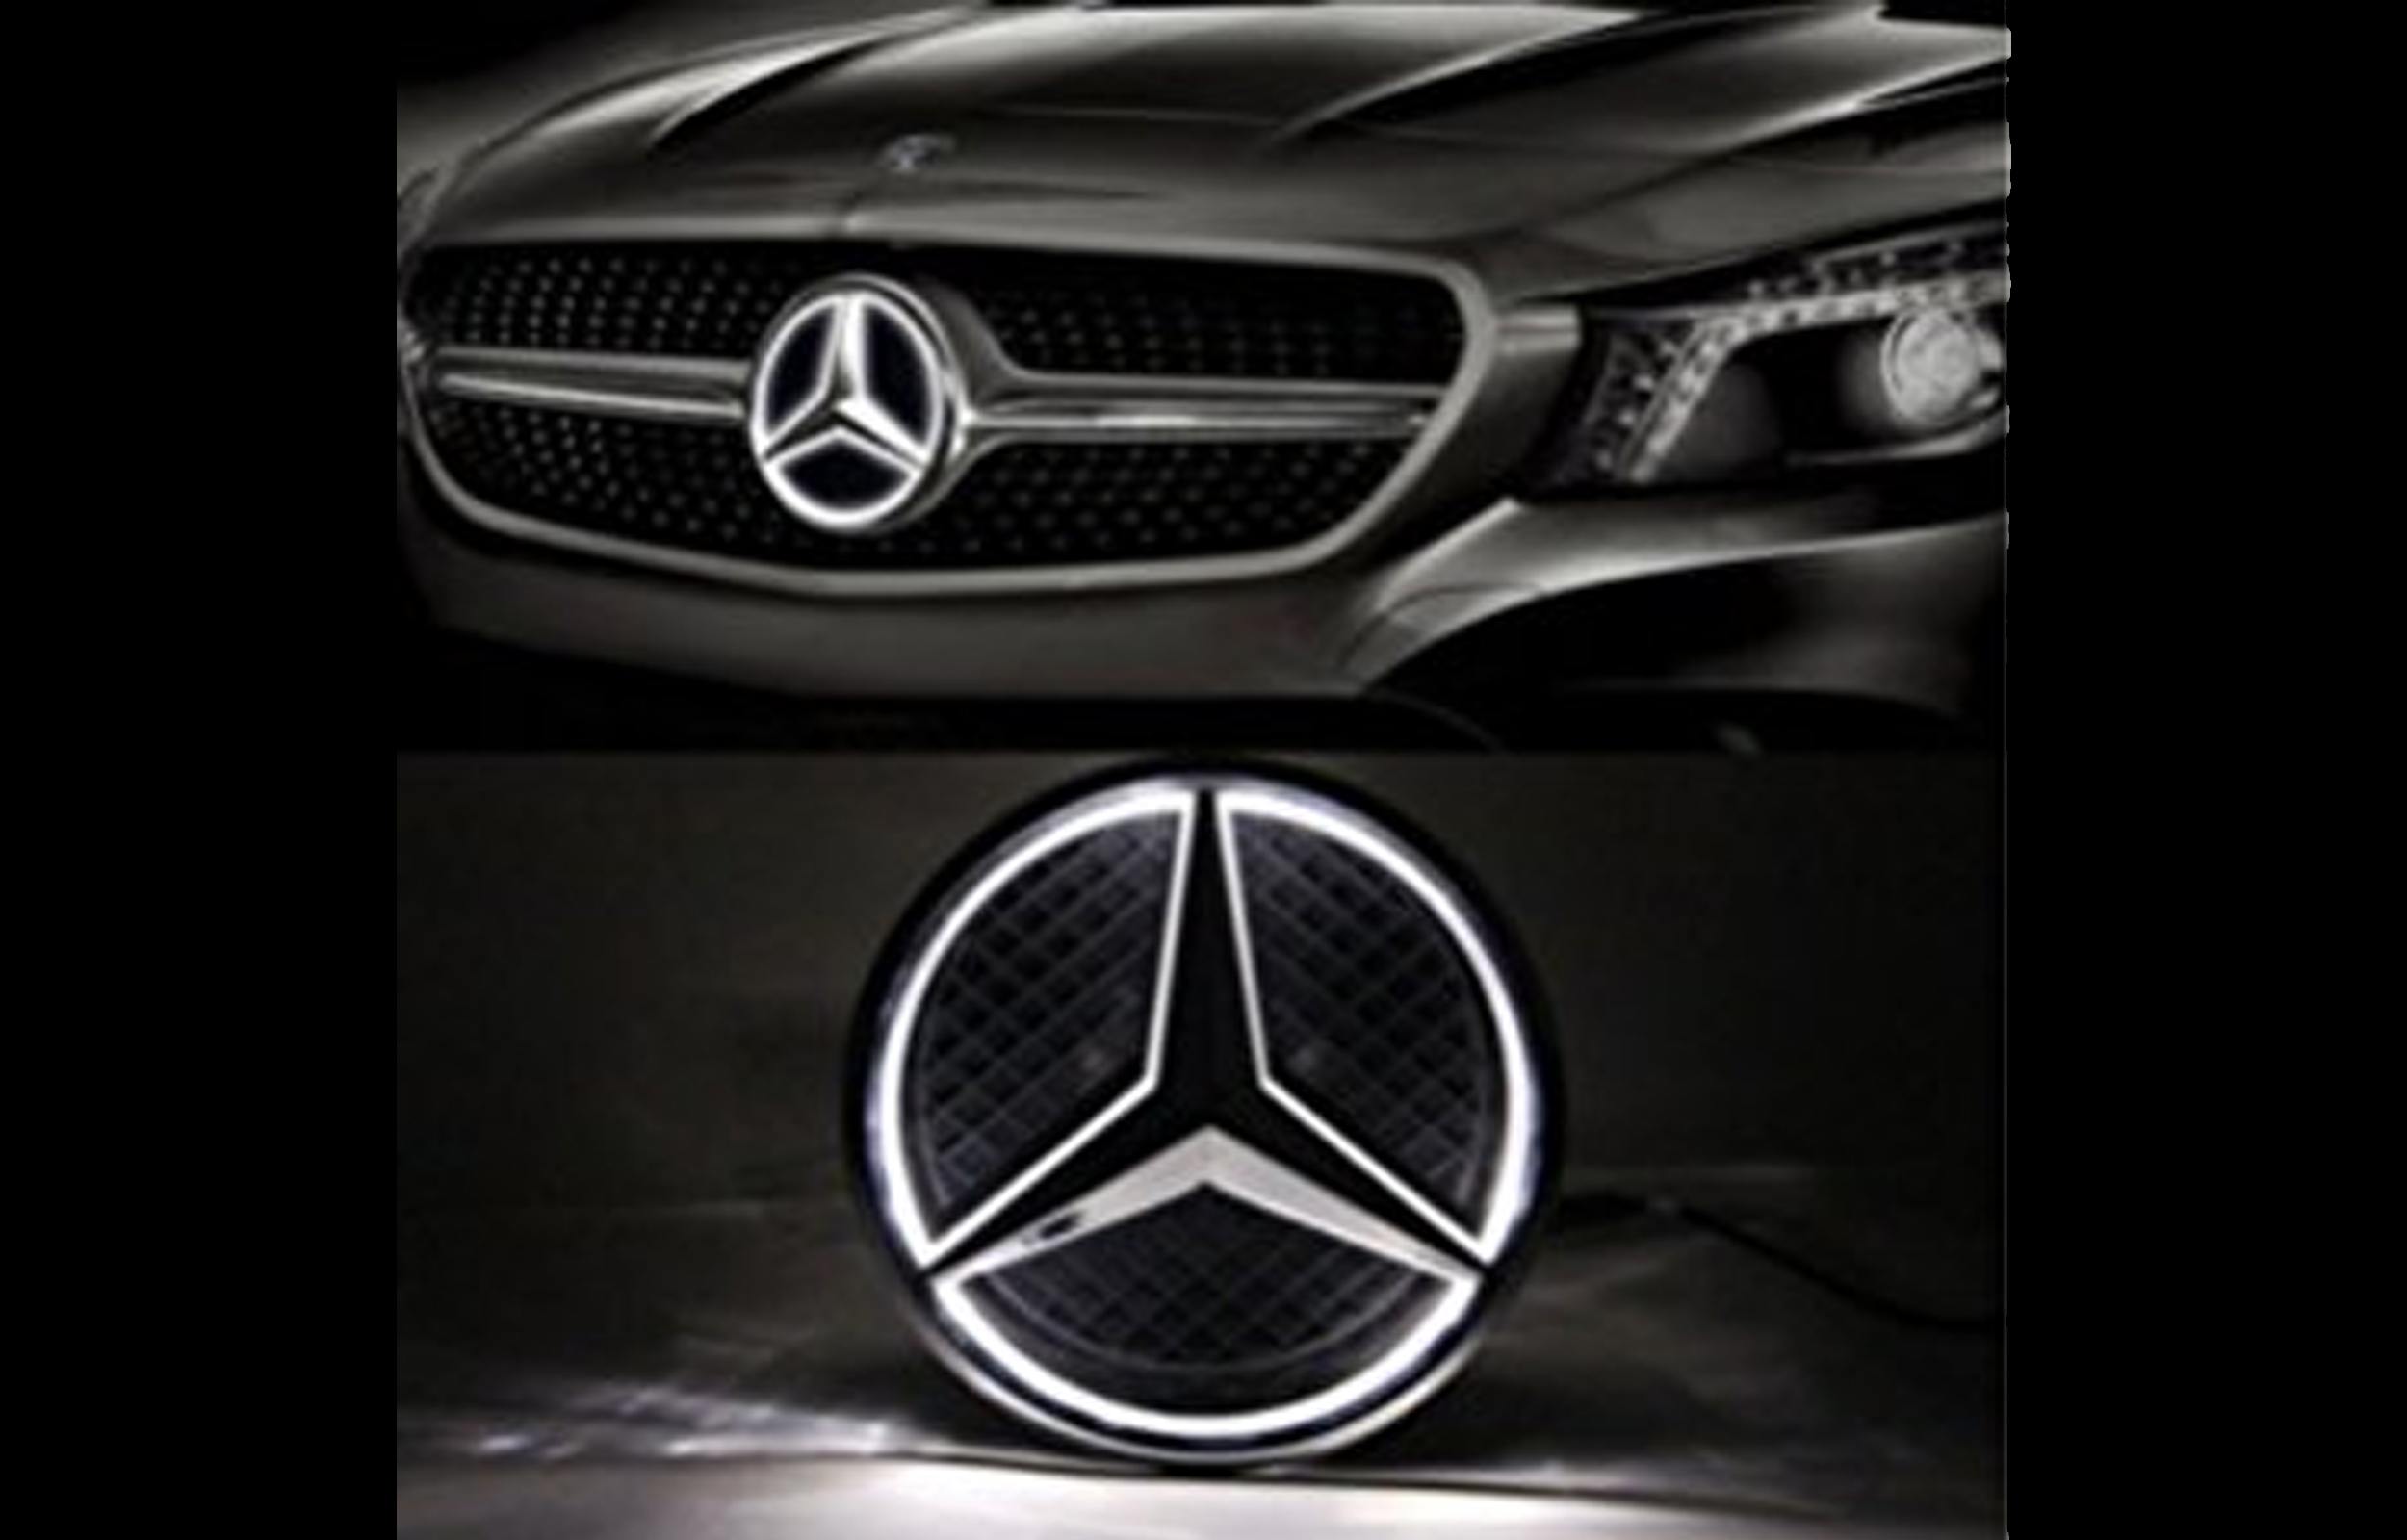 Illuminated Mercedes Benz Badge - The HID Factory